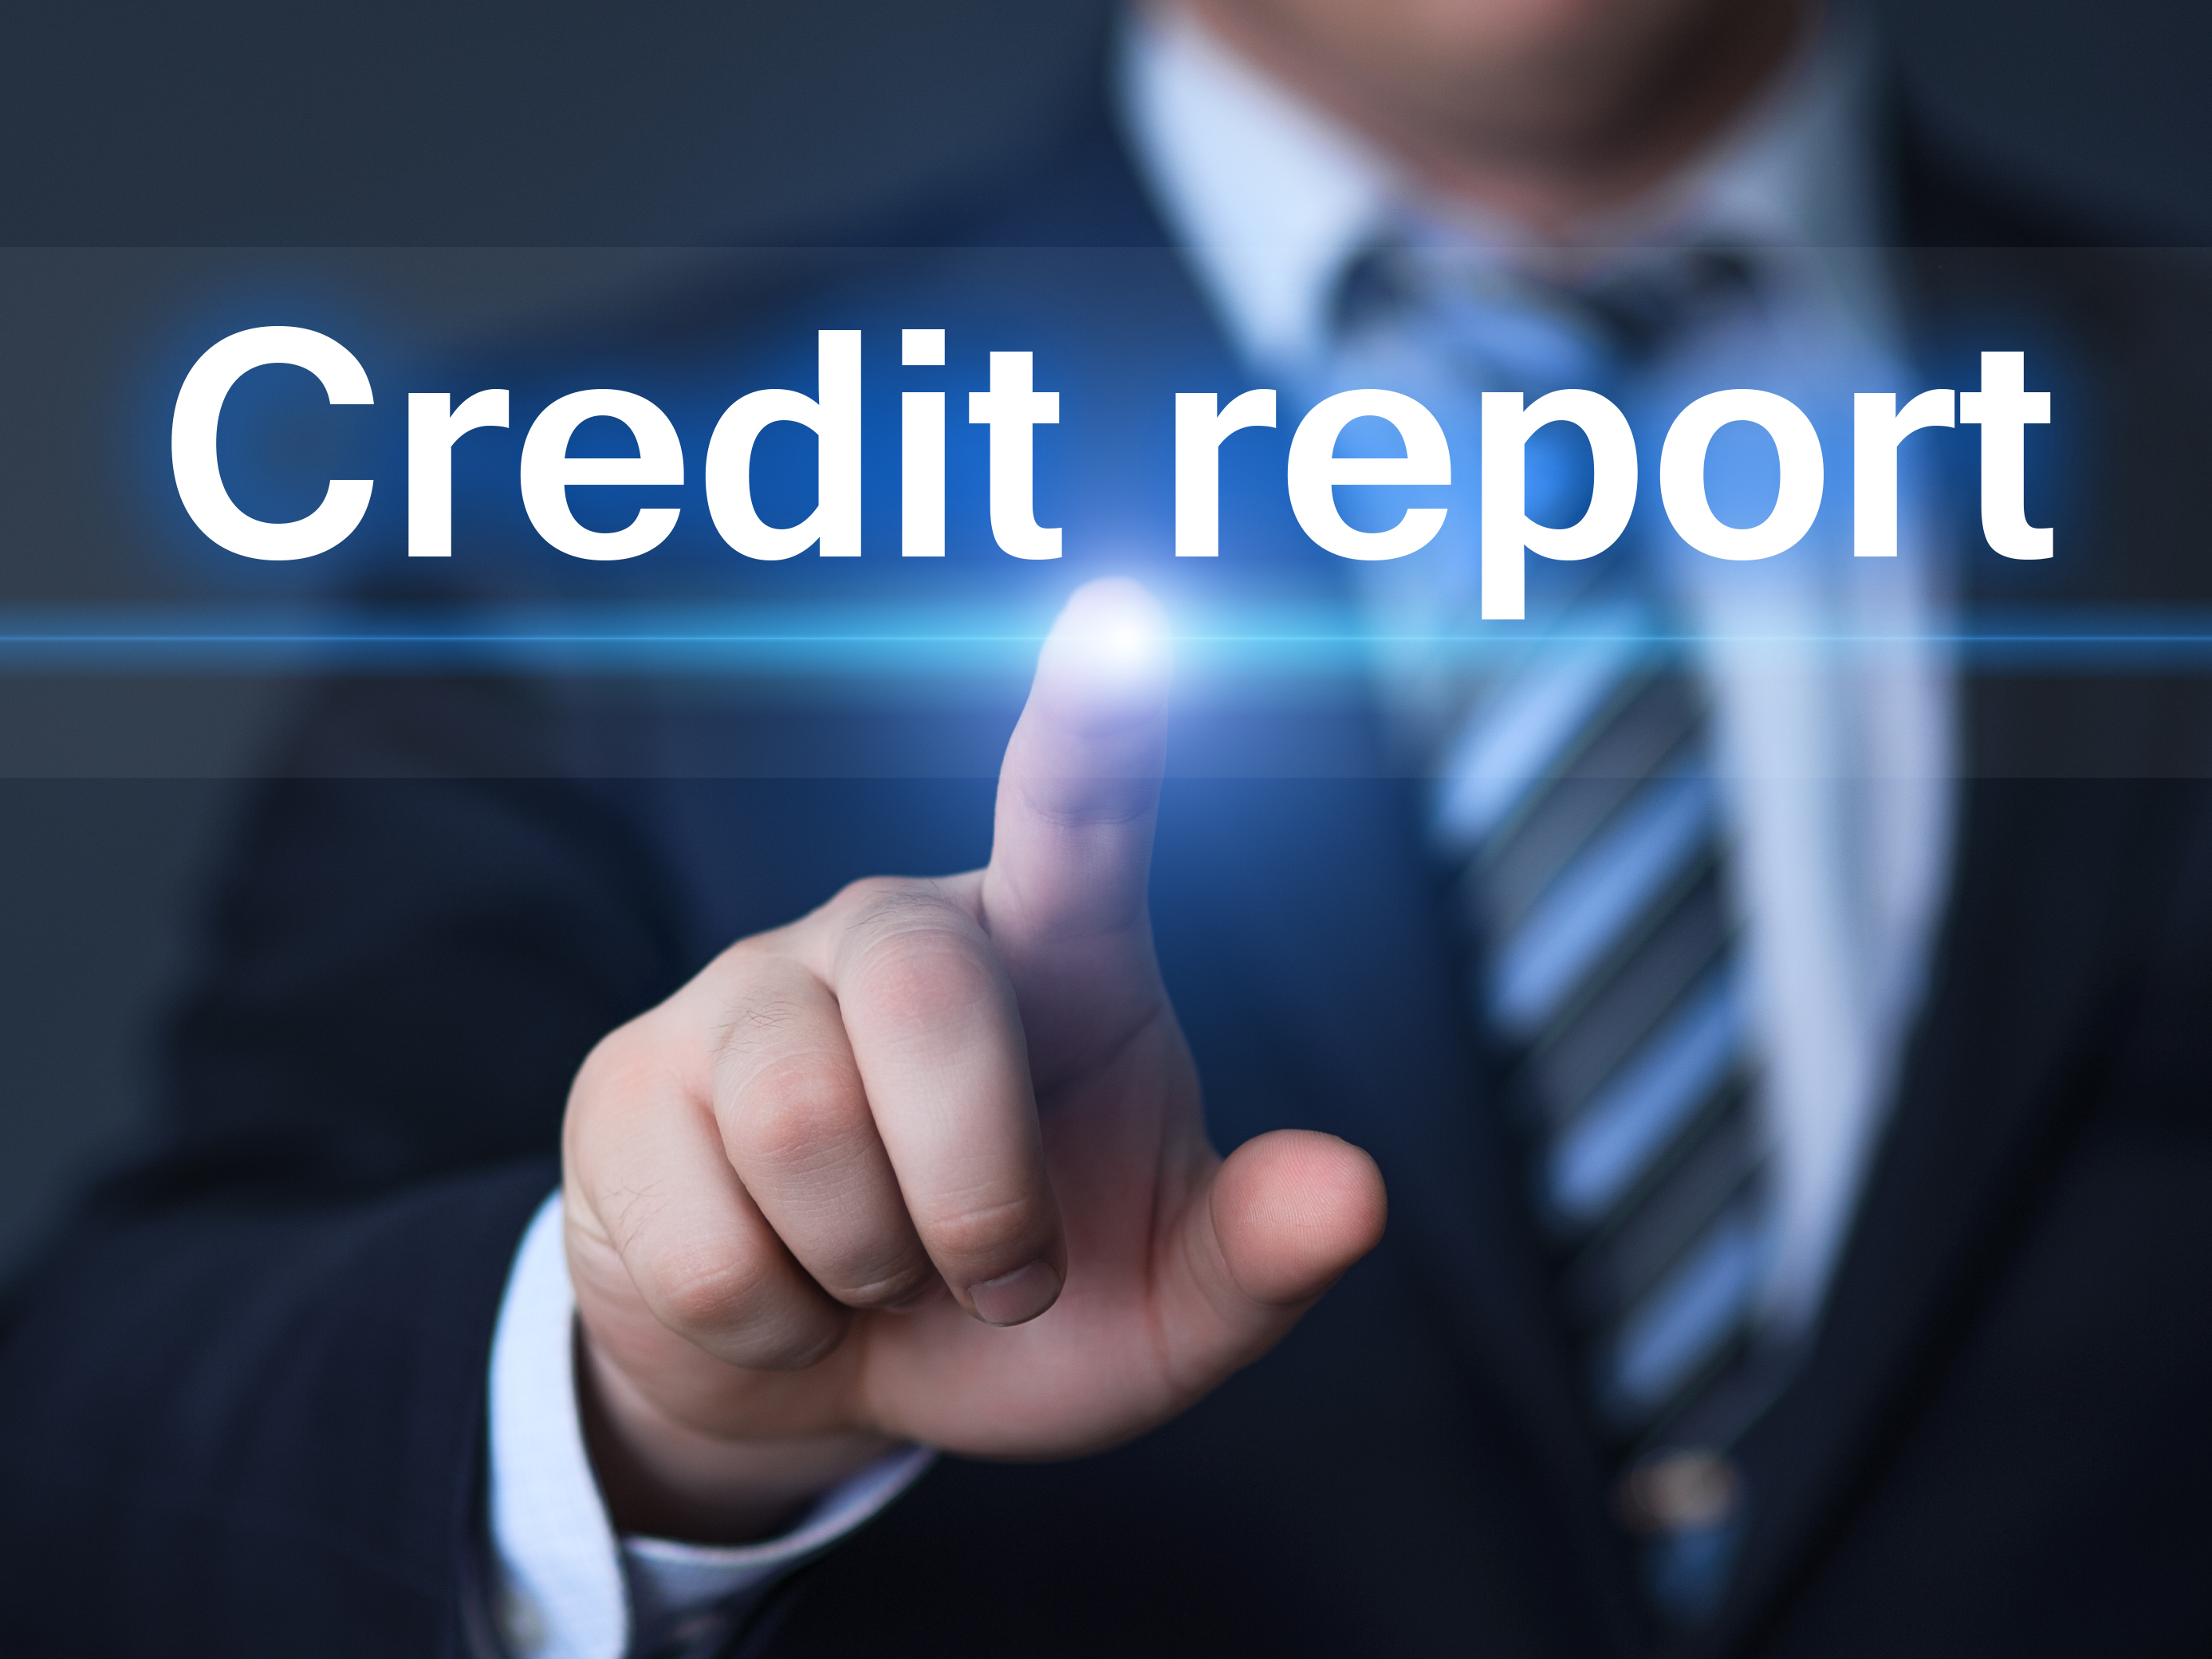 How do you obtain a free credit report?